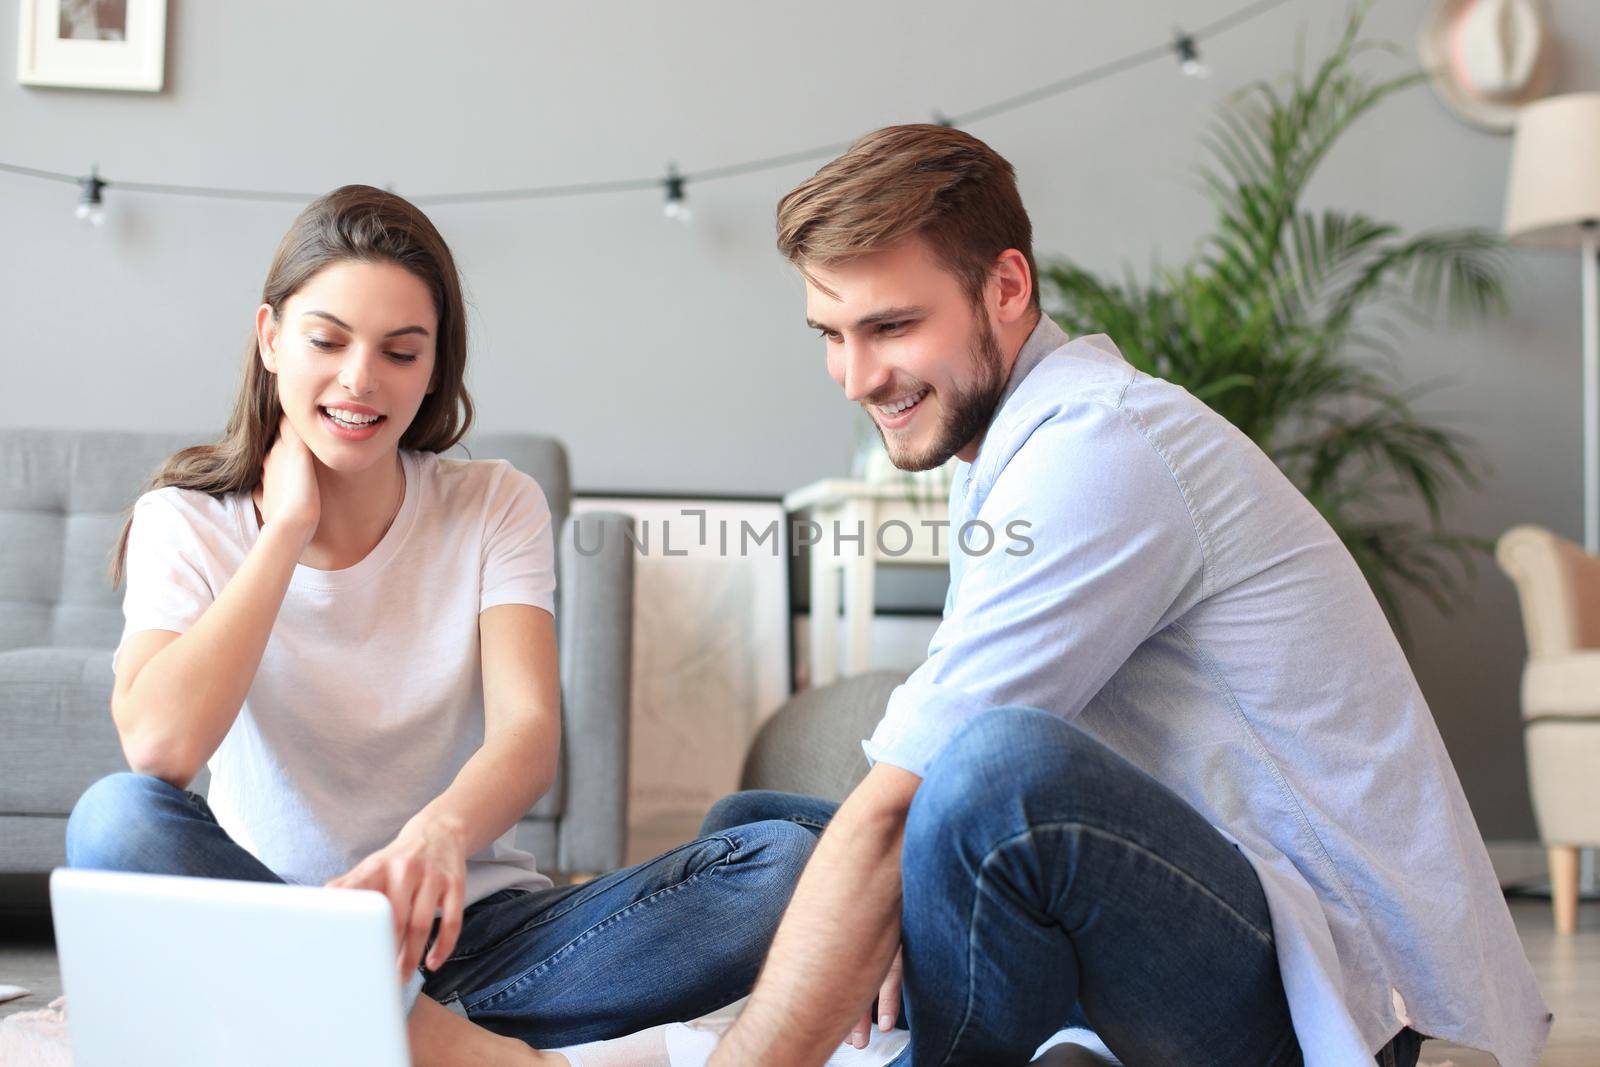 Young couple doing some online shopping at home, using a laptop on floor. by tsyhun